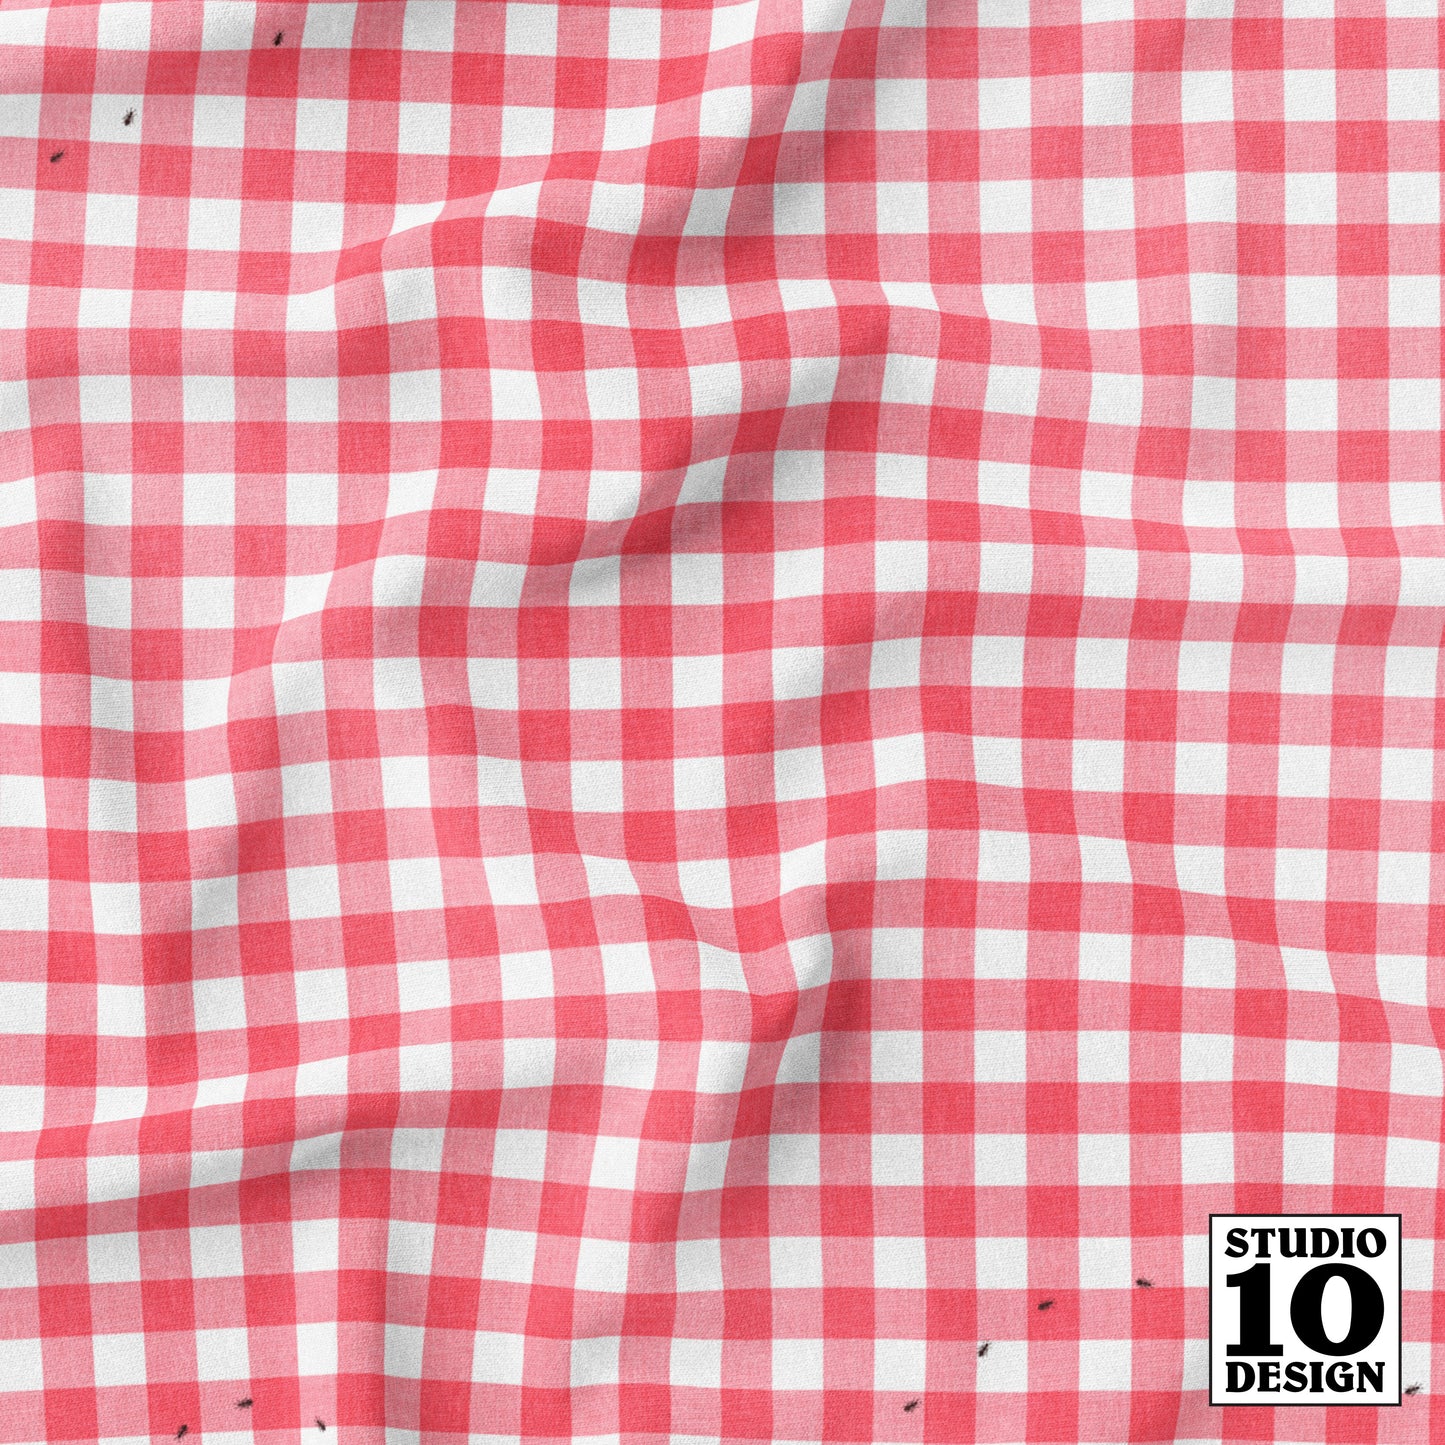 Ants at the Picnic, Red Gingham Printed Fabric by Studio Ten Design